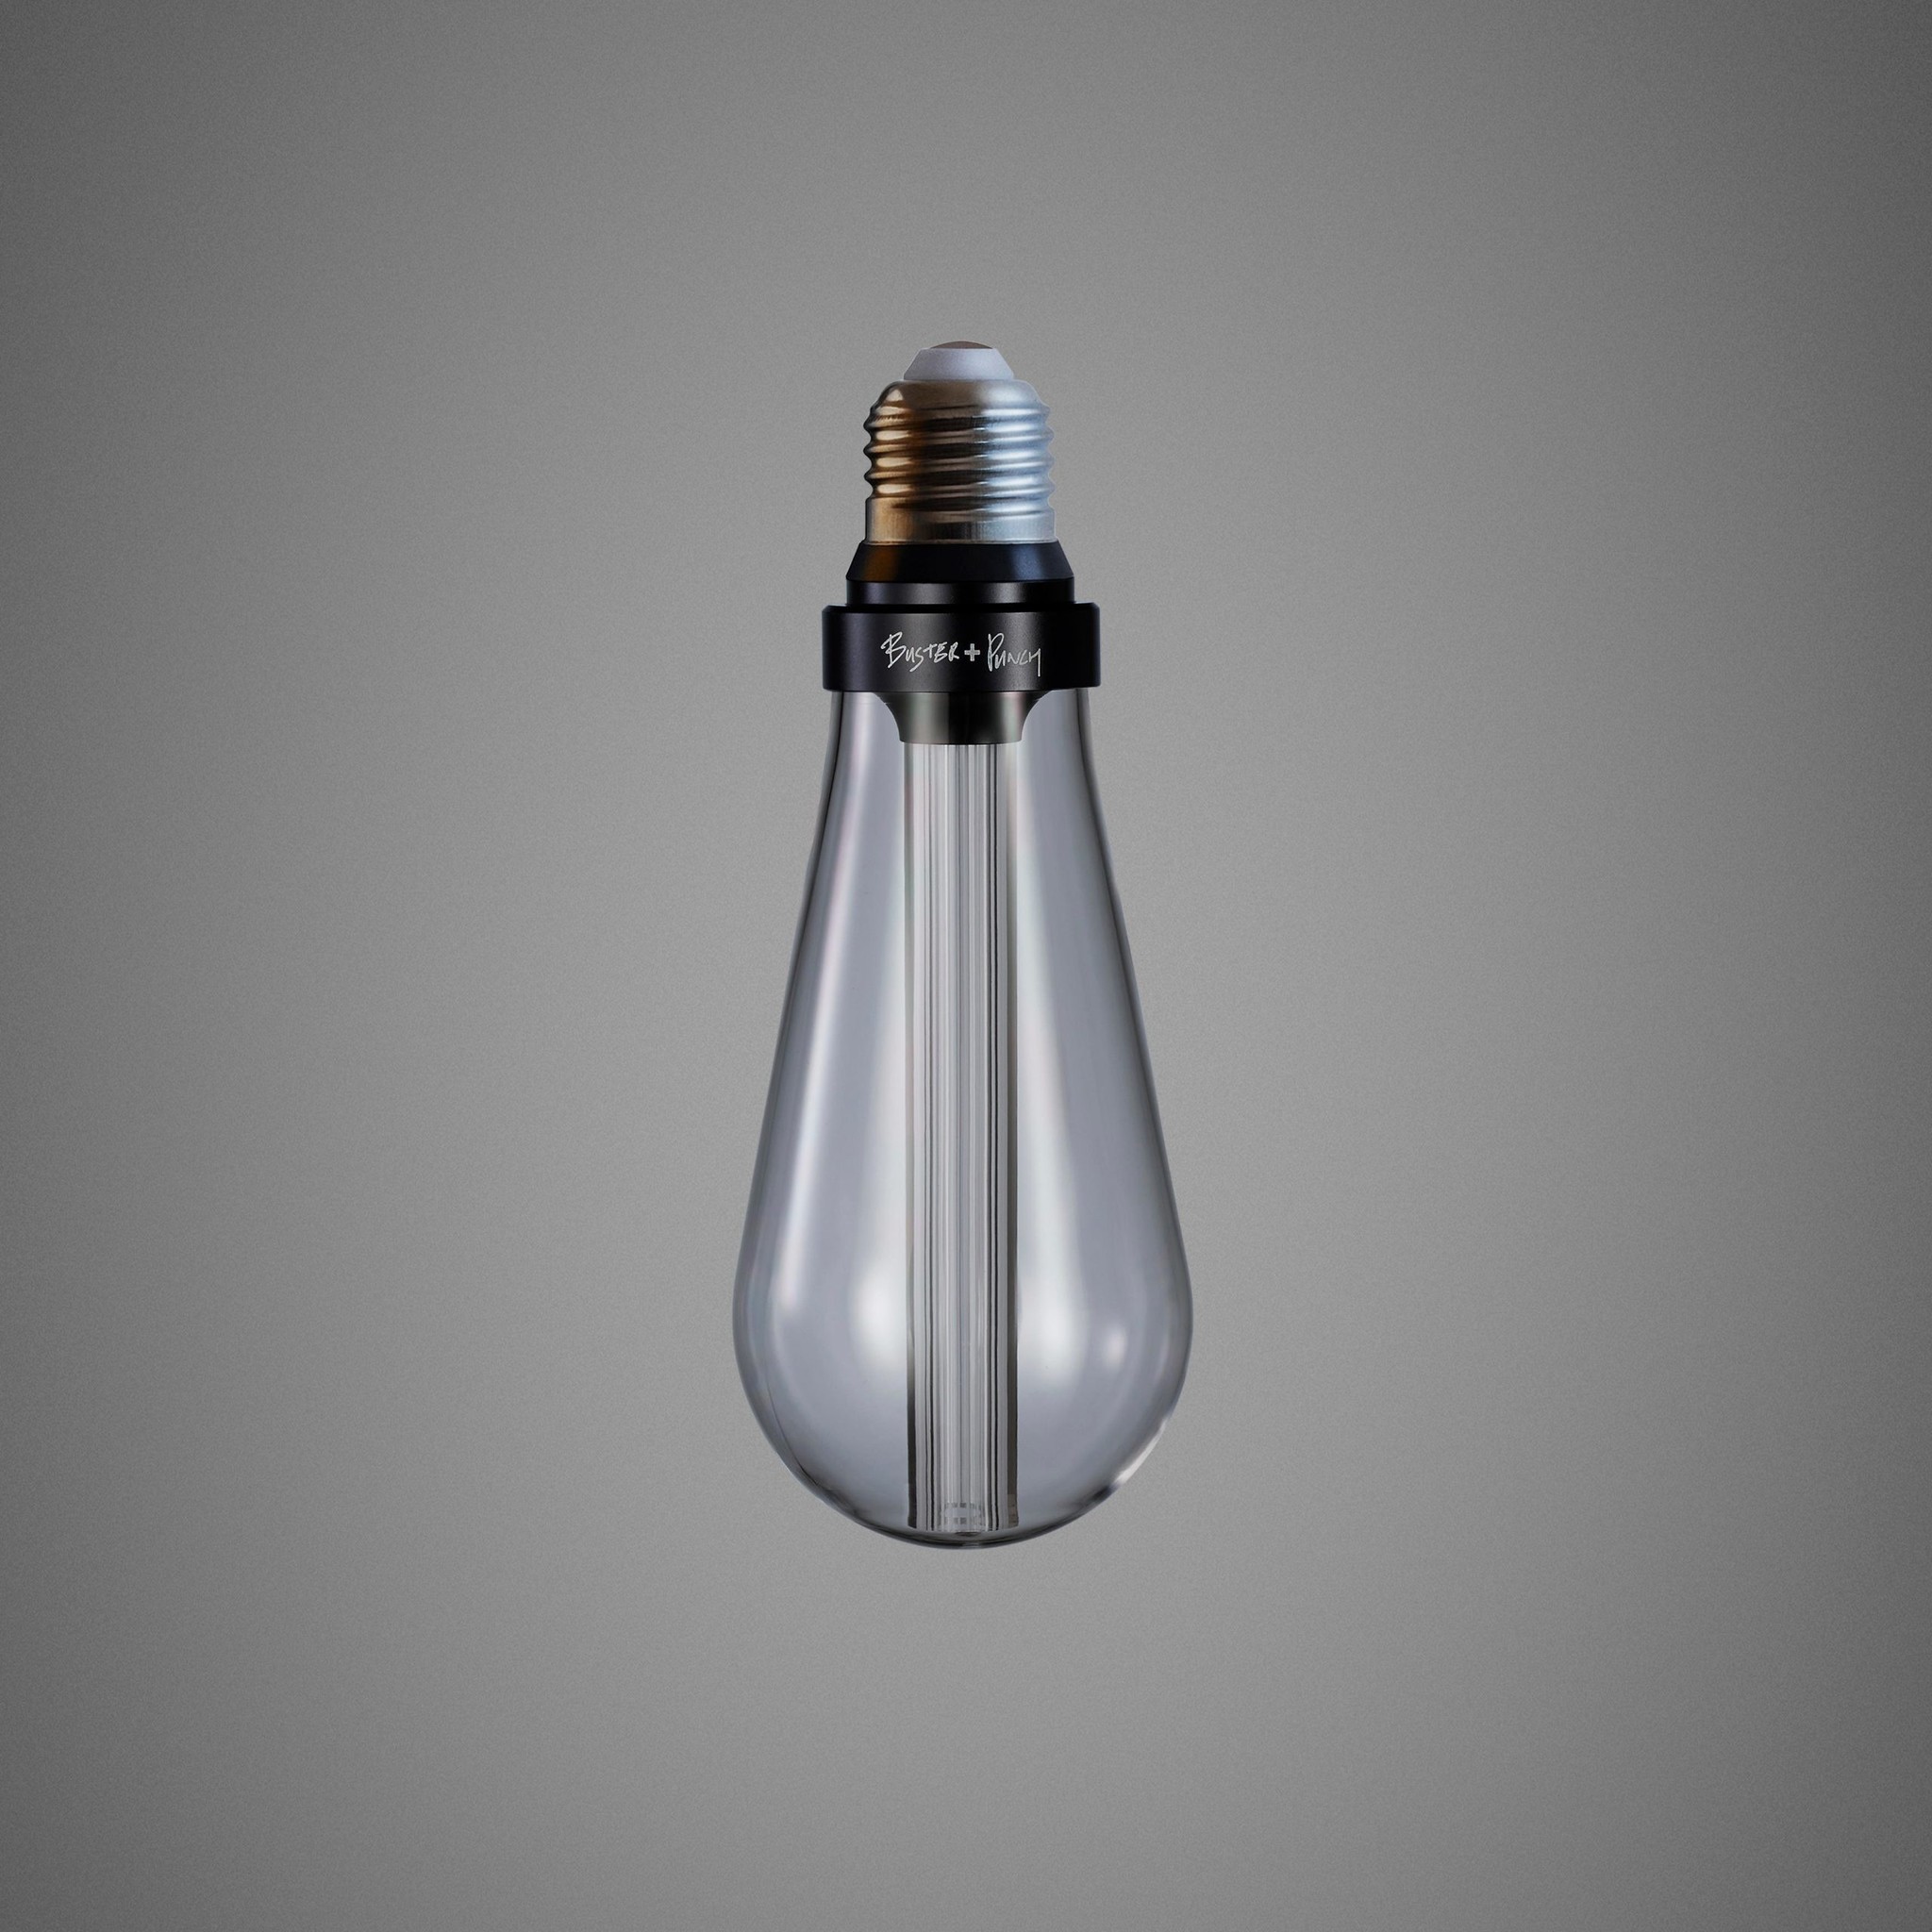 LAMPE LED BUSTER / CRISTAL / E27 / DIMMABLE